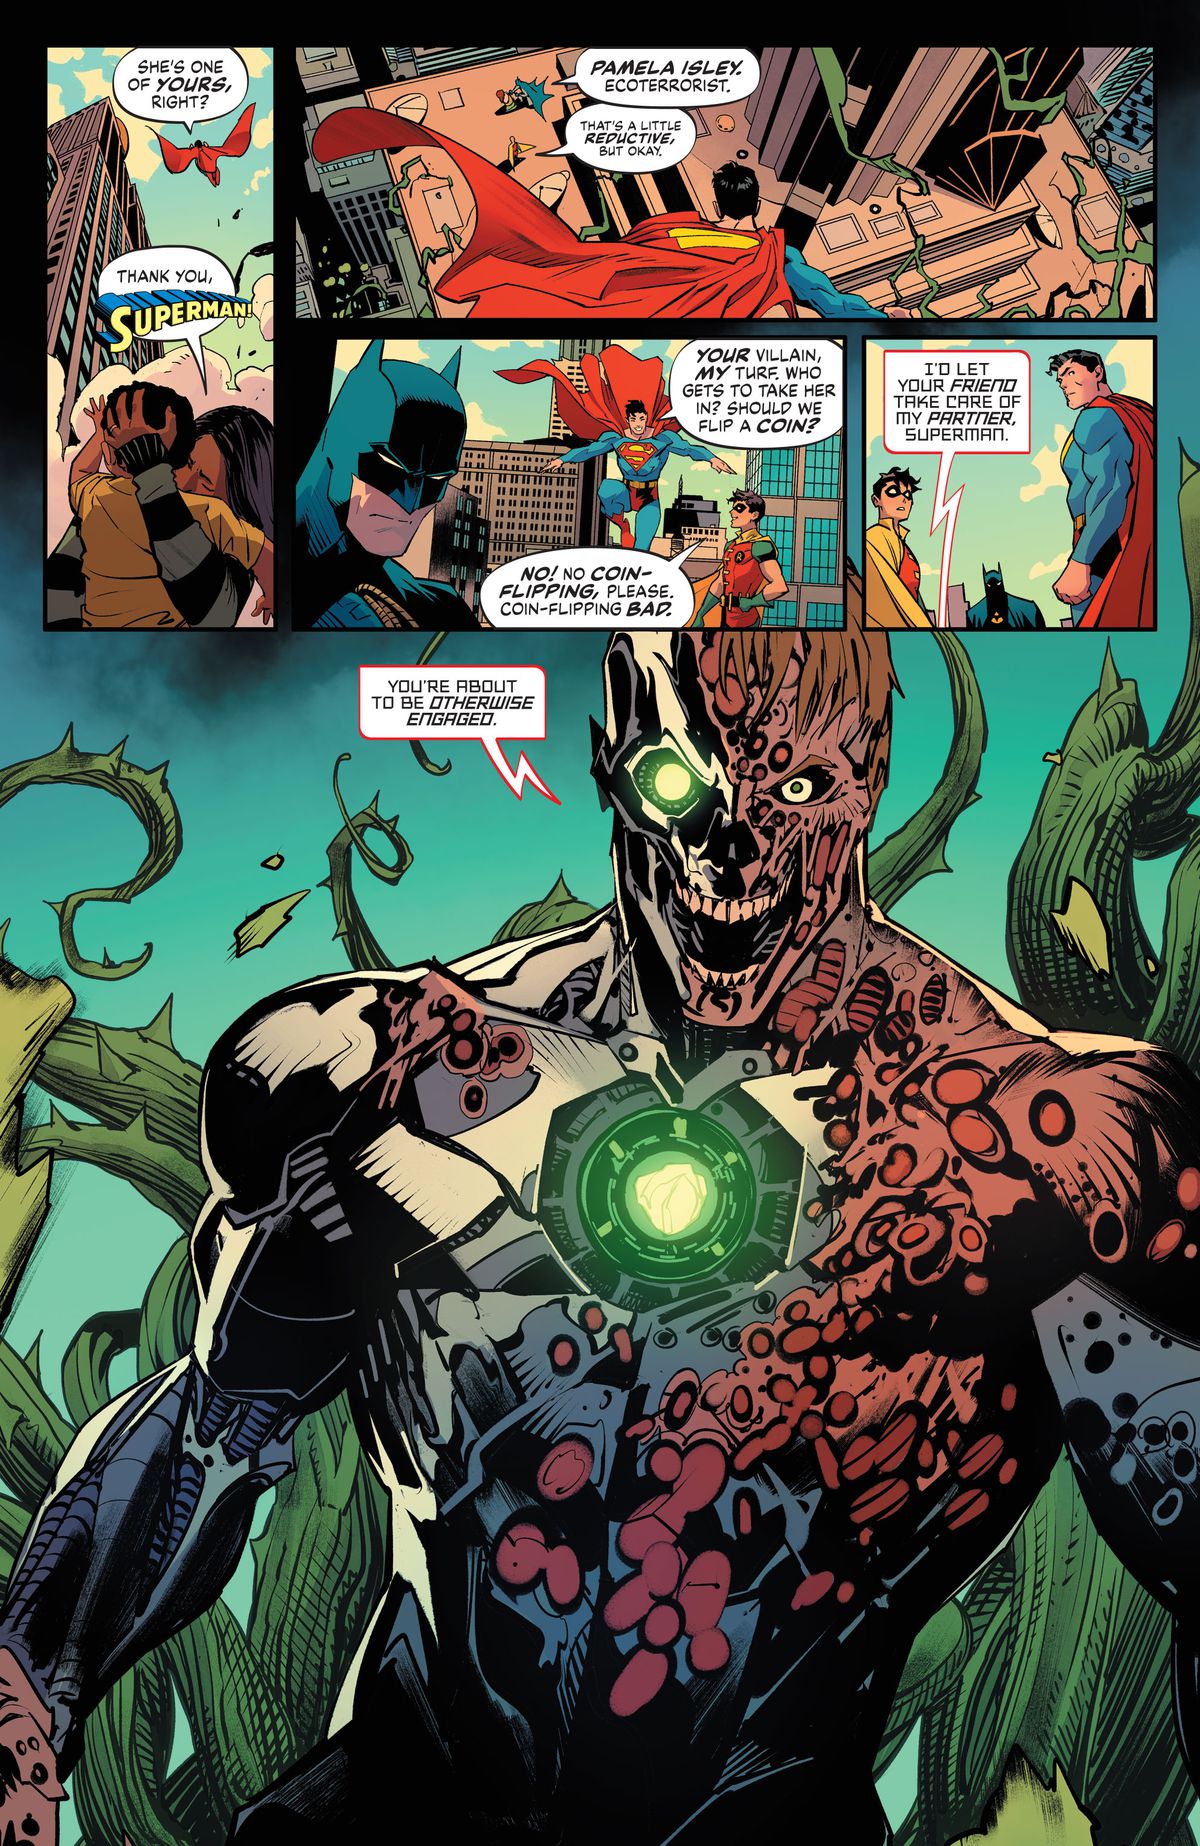 A page from the backup story of Detective Comics #1050 (2022).